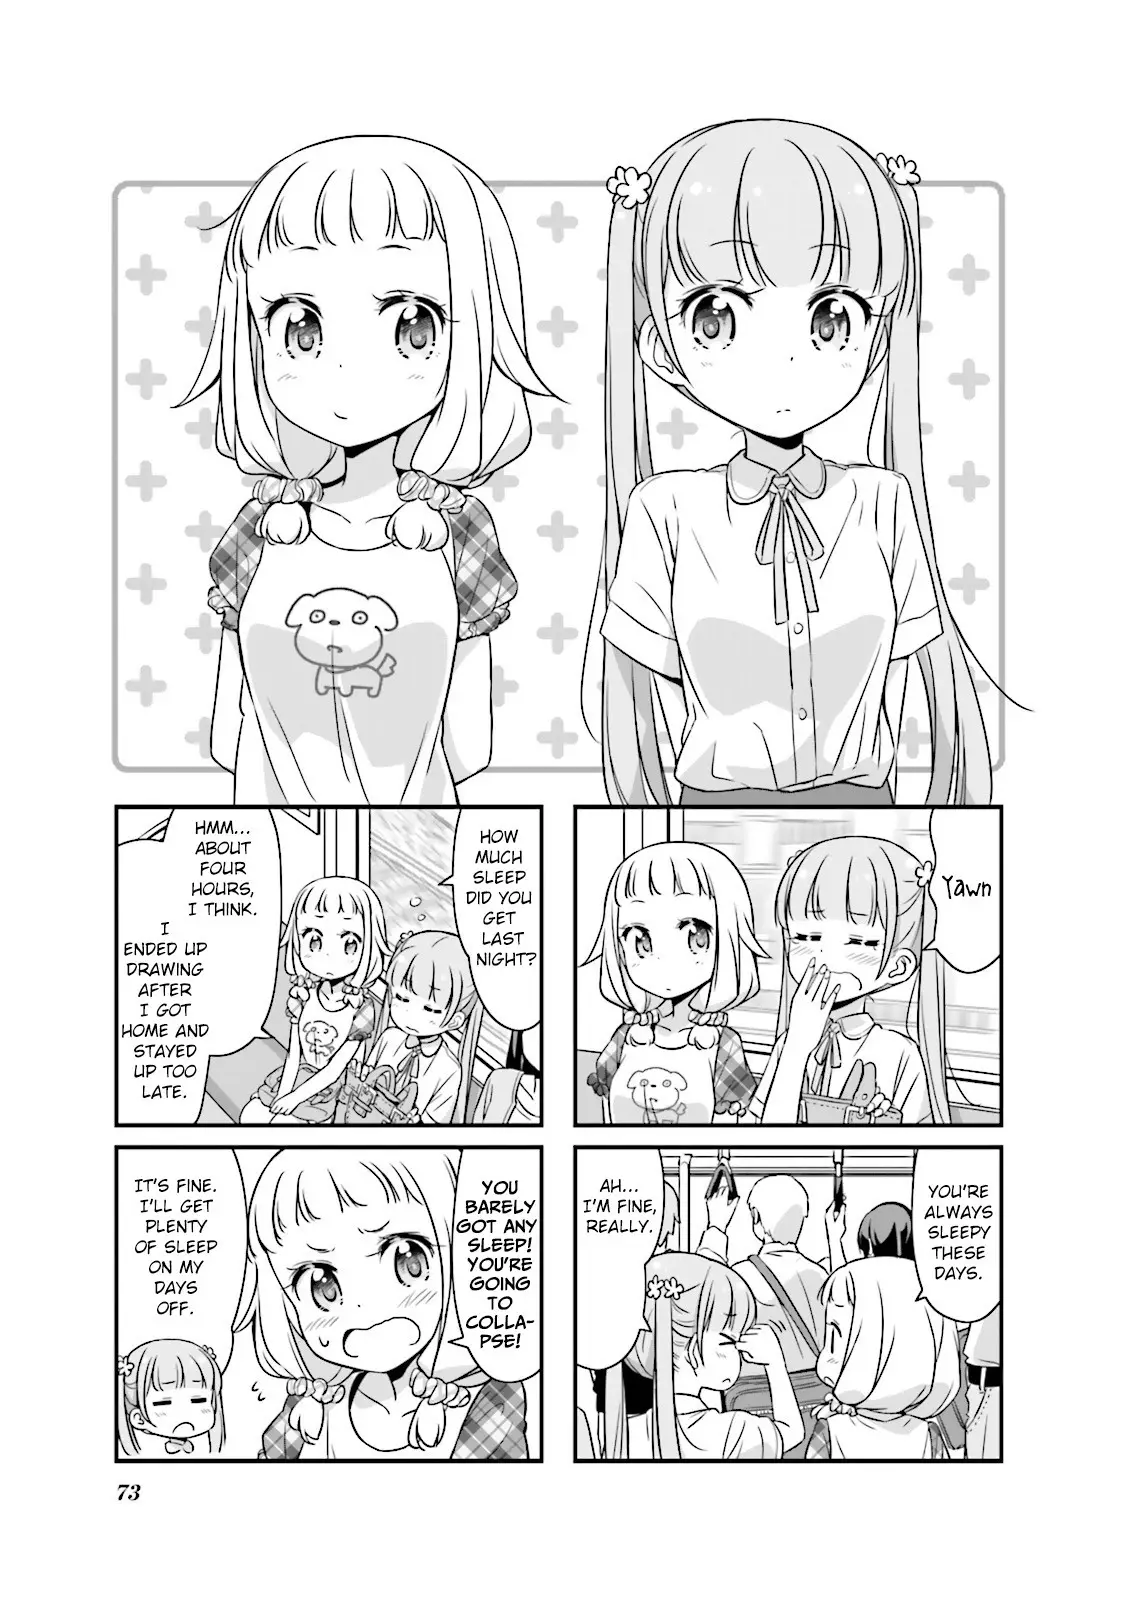 New Game! - 21 page p_00001